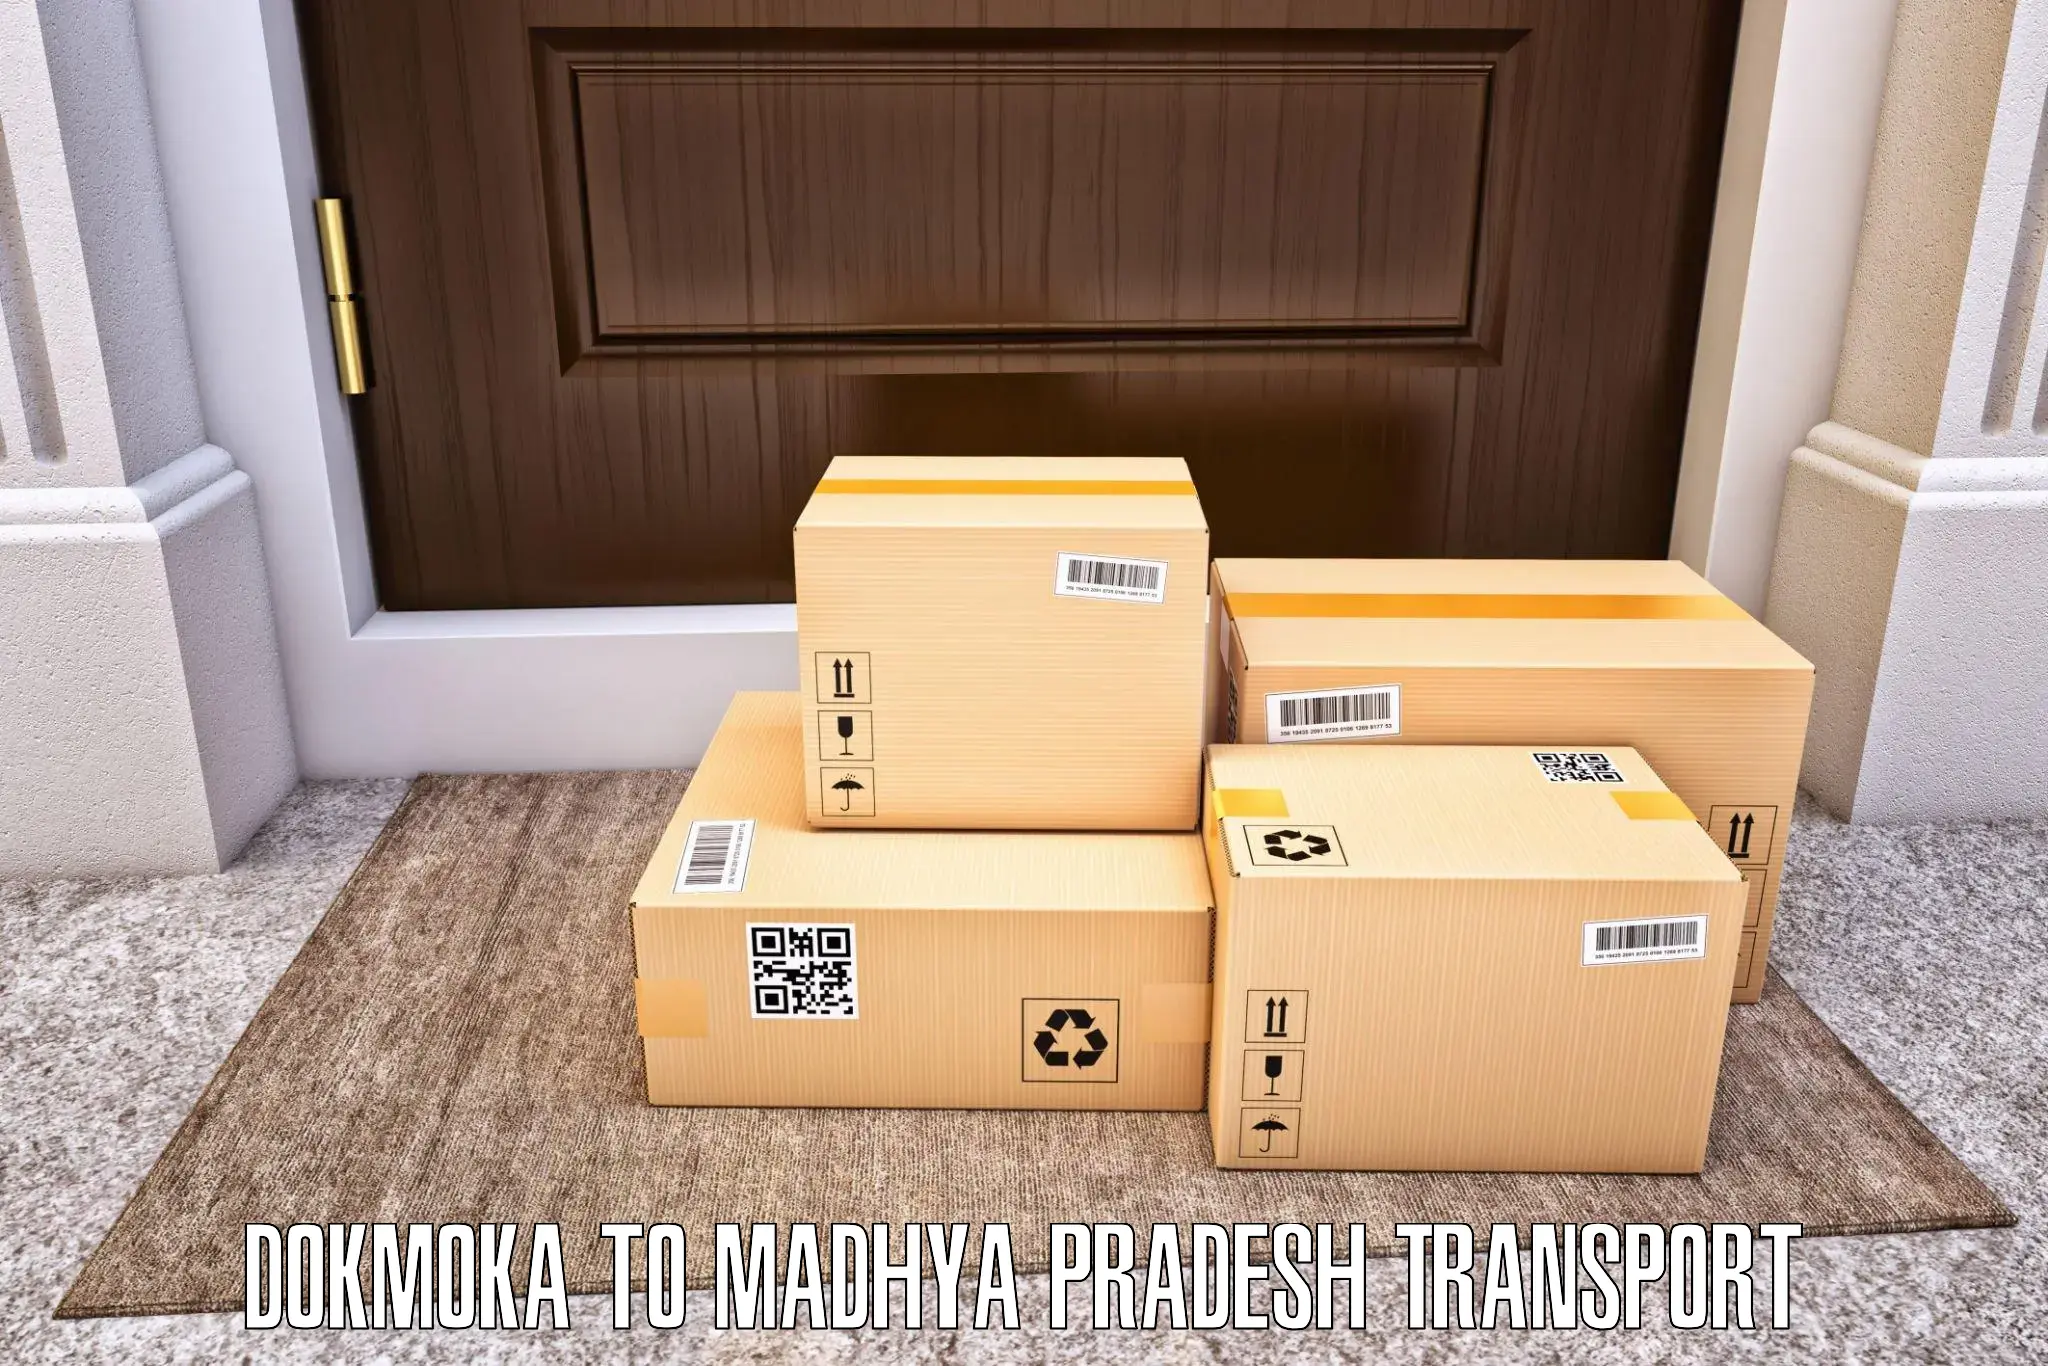 Nationwide transport services in Dokmoka to BHEL Bhopal